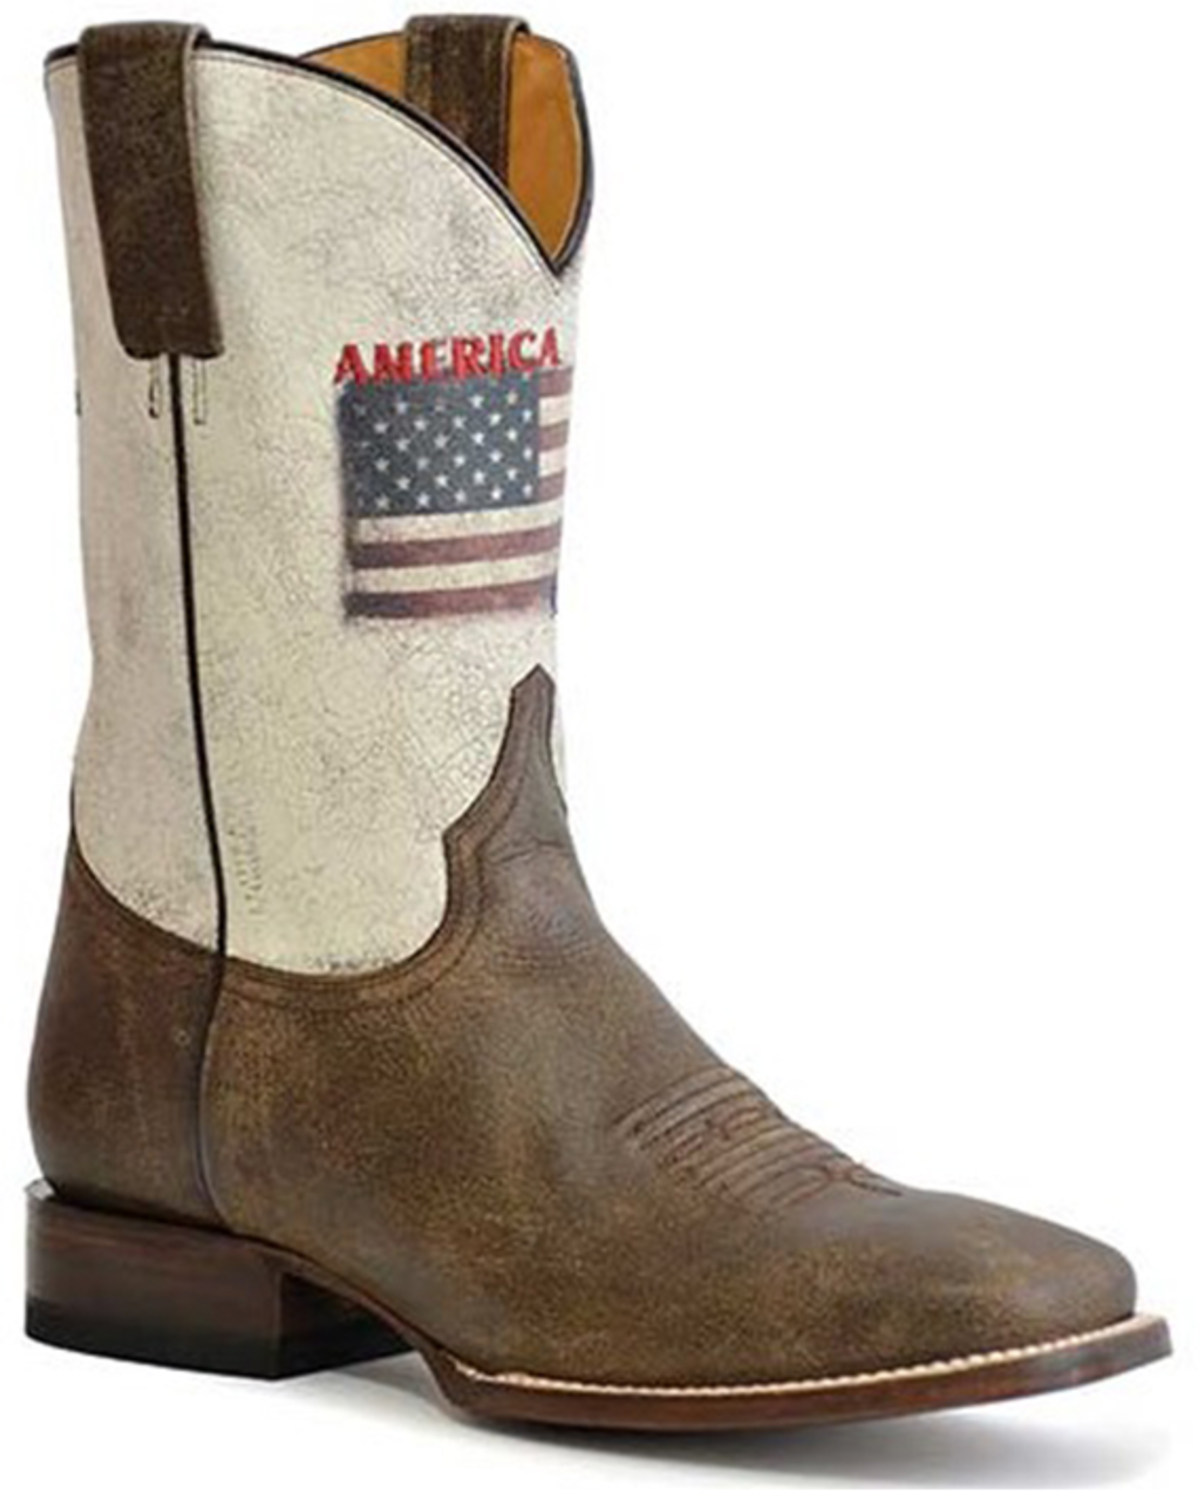 Roper Men's America Strong Western Boots - Broad Square Toe